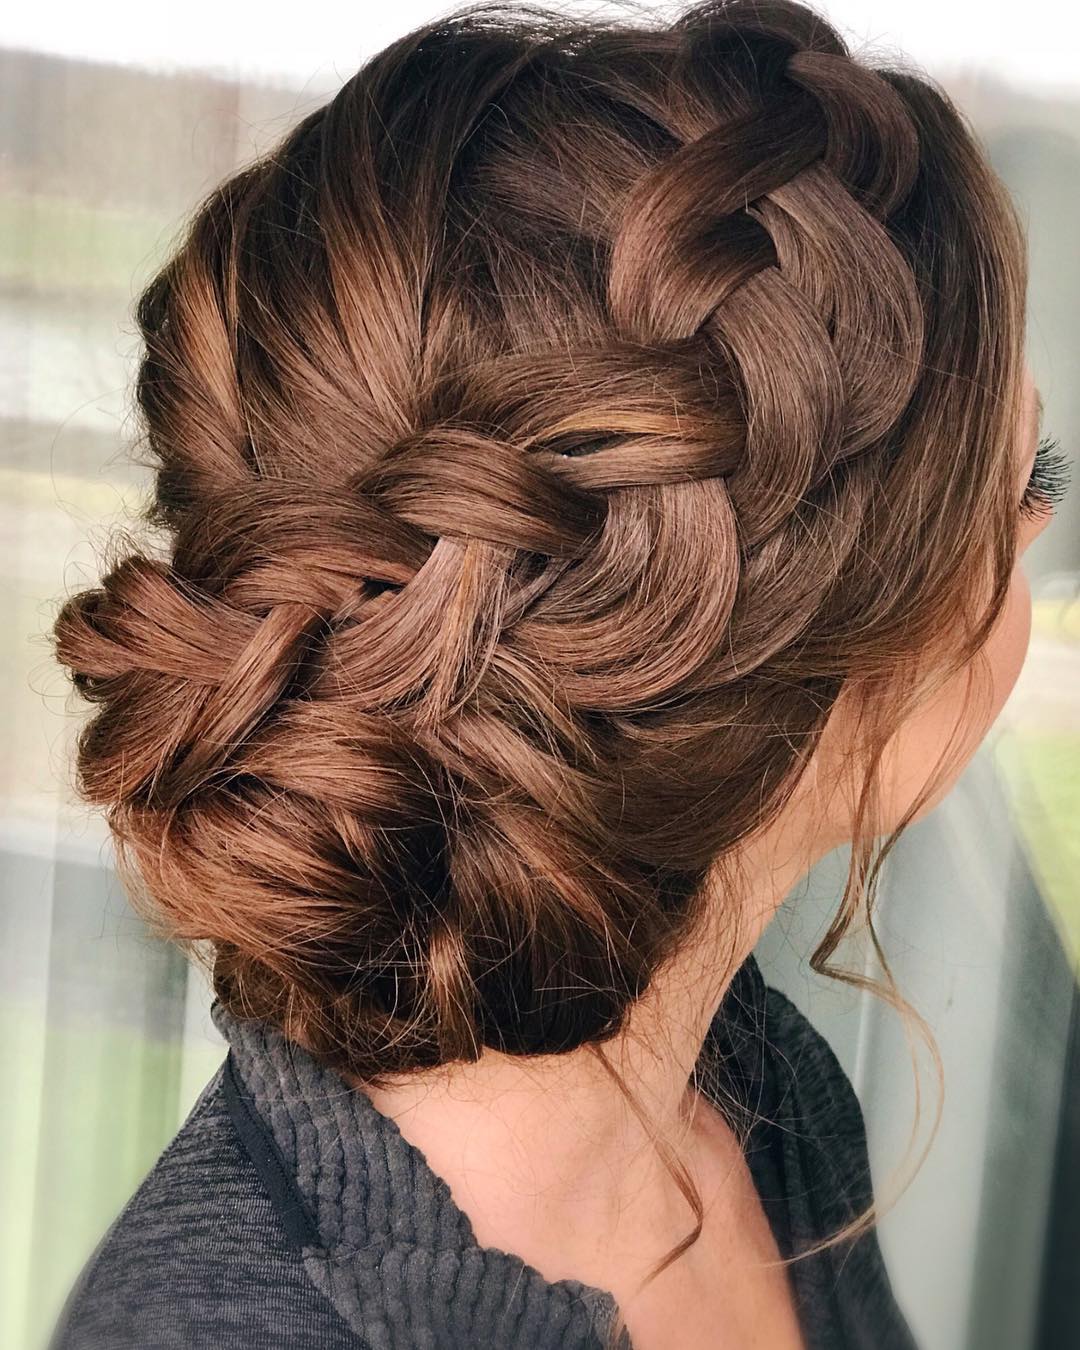 Casual Braided Updo With A Bun